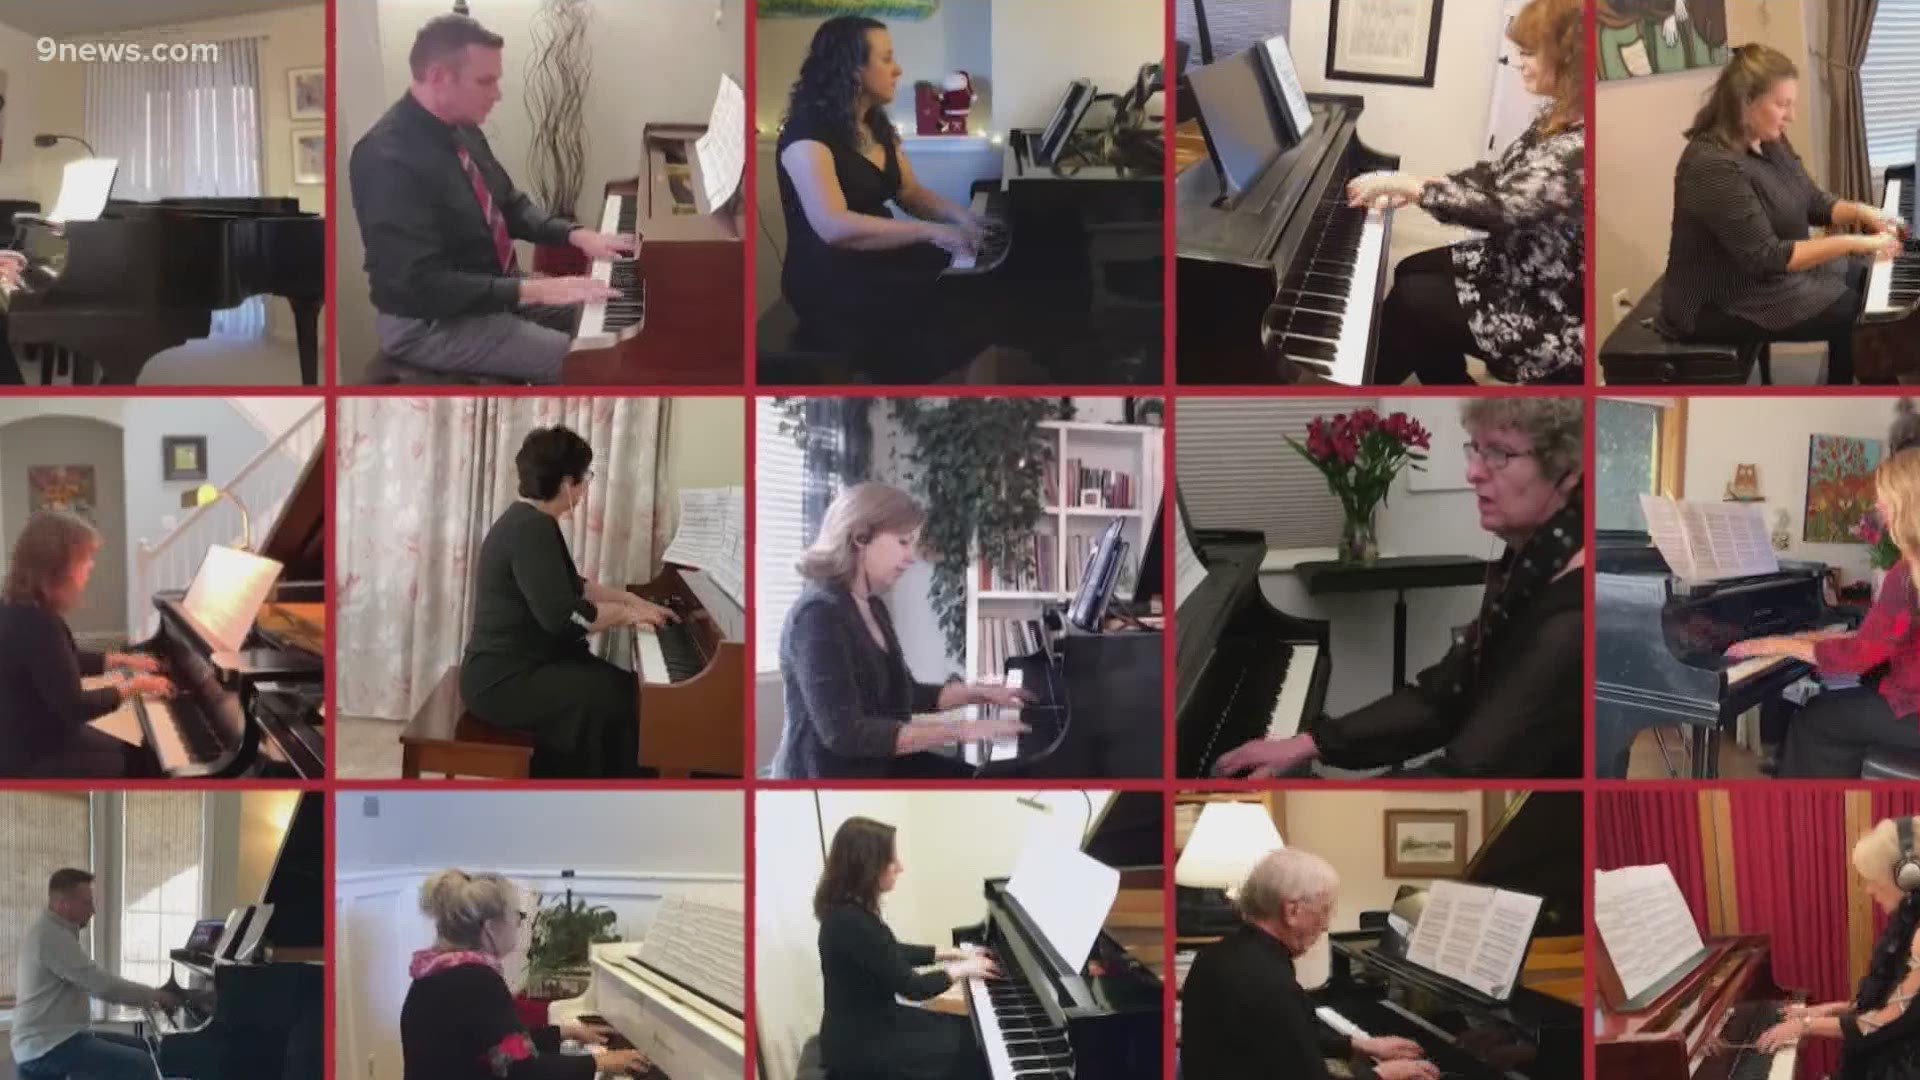 BAMTA has hosted its Multiple Piano Festival for over 35 years. This year, the concert can be viewed worldwide on YouTube.